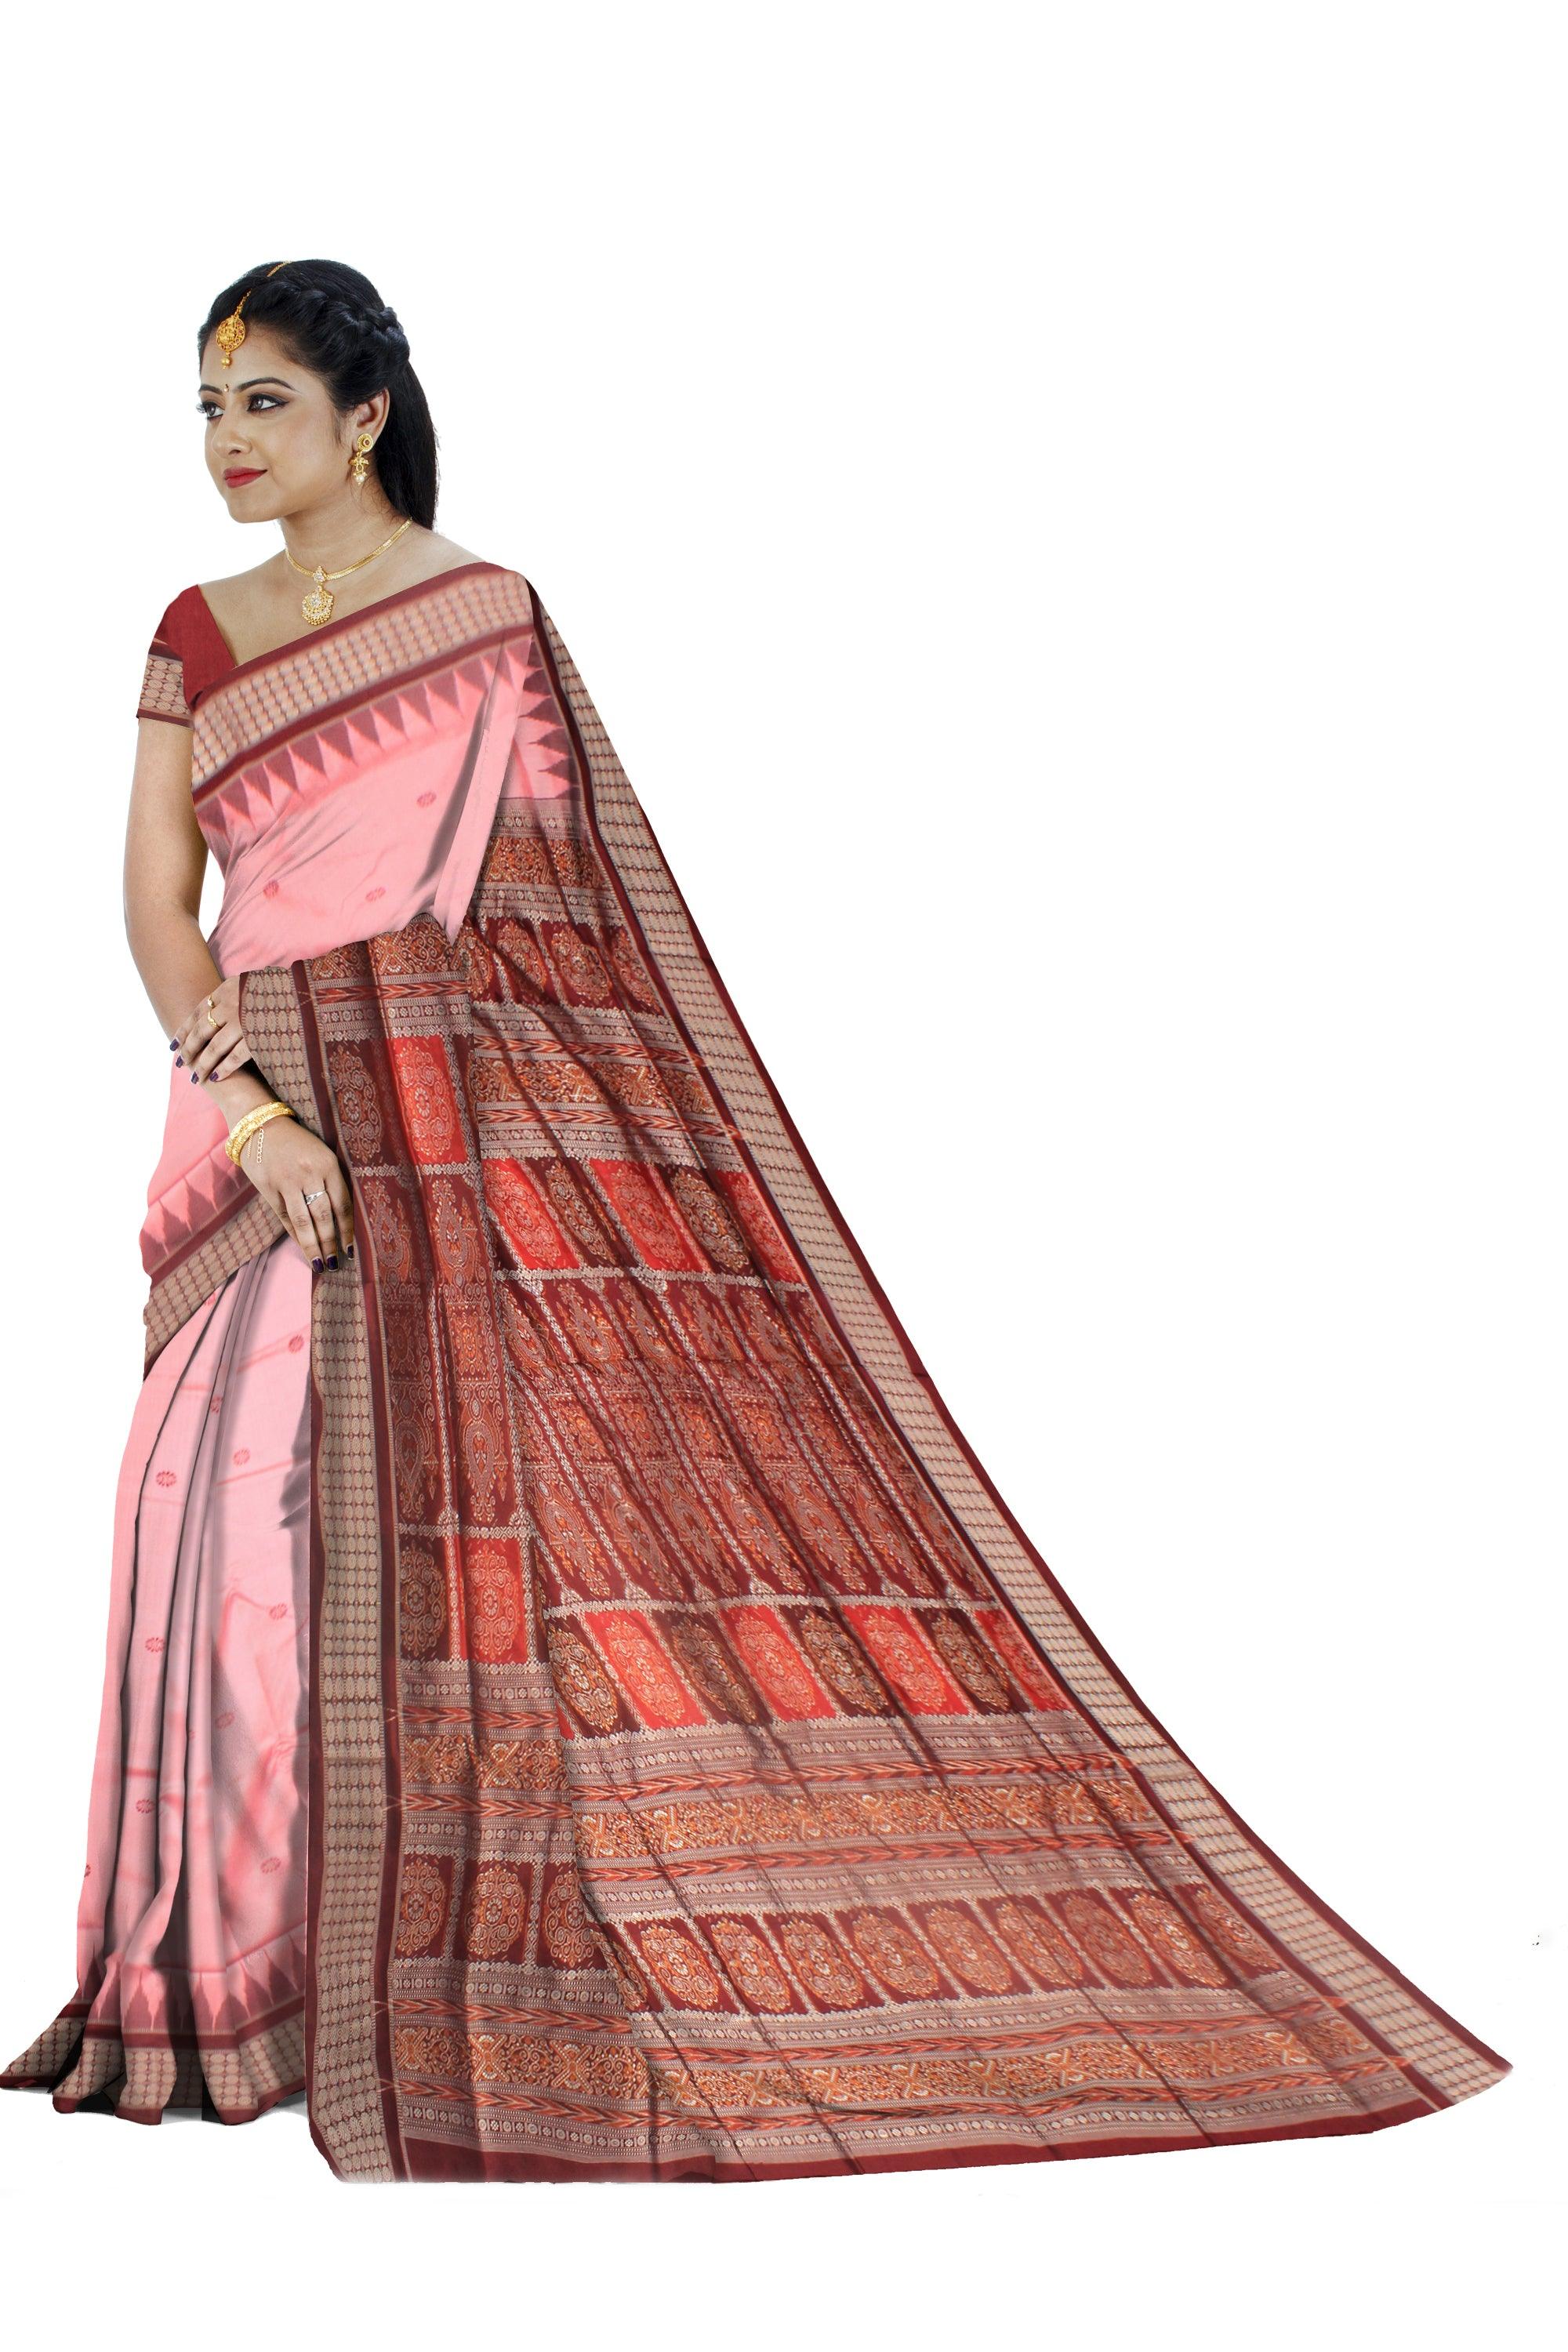 BABY PINK AND MAROON COLOR BOOTY PATTERN PATA SAREE , ATTACHED WITH BLOUSE PIECE. - Koshali Arts & Crafts Enterprise